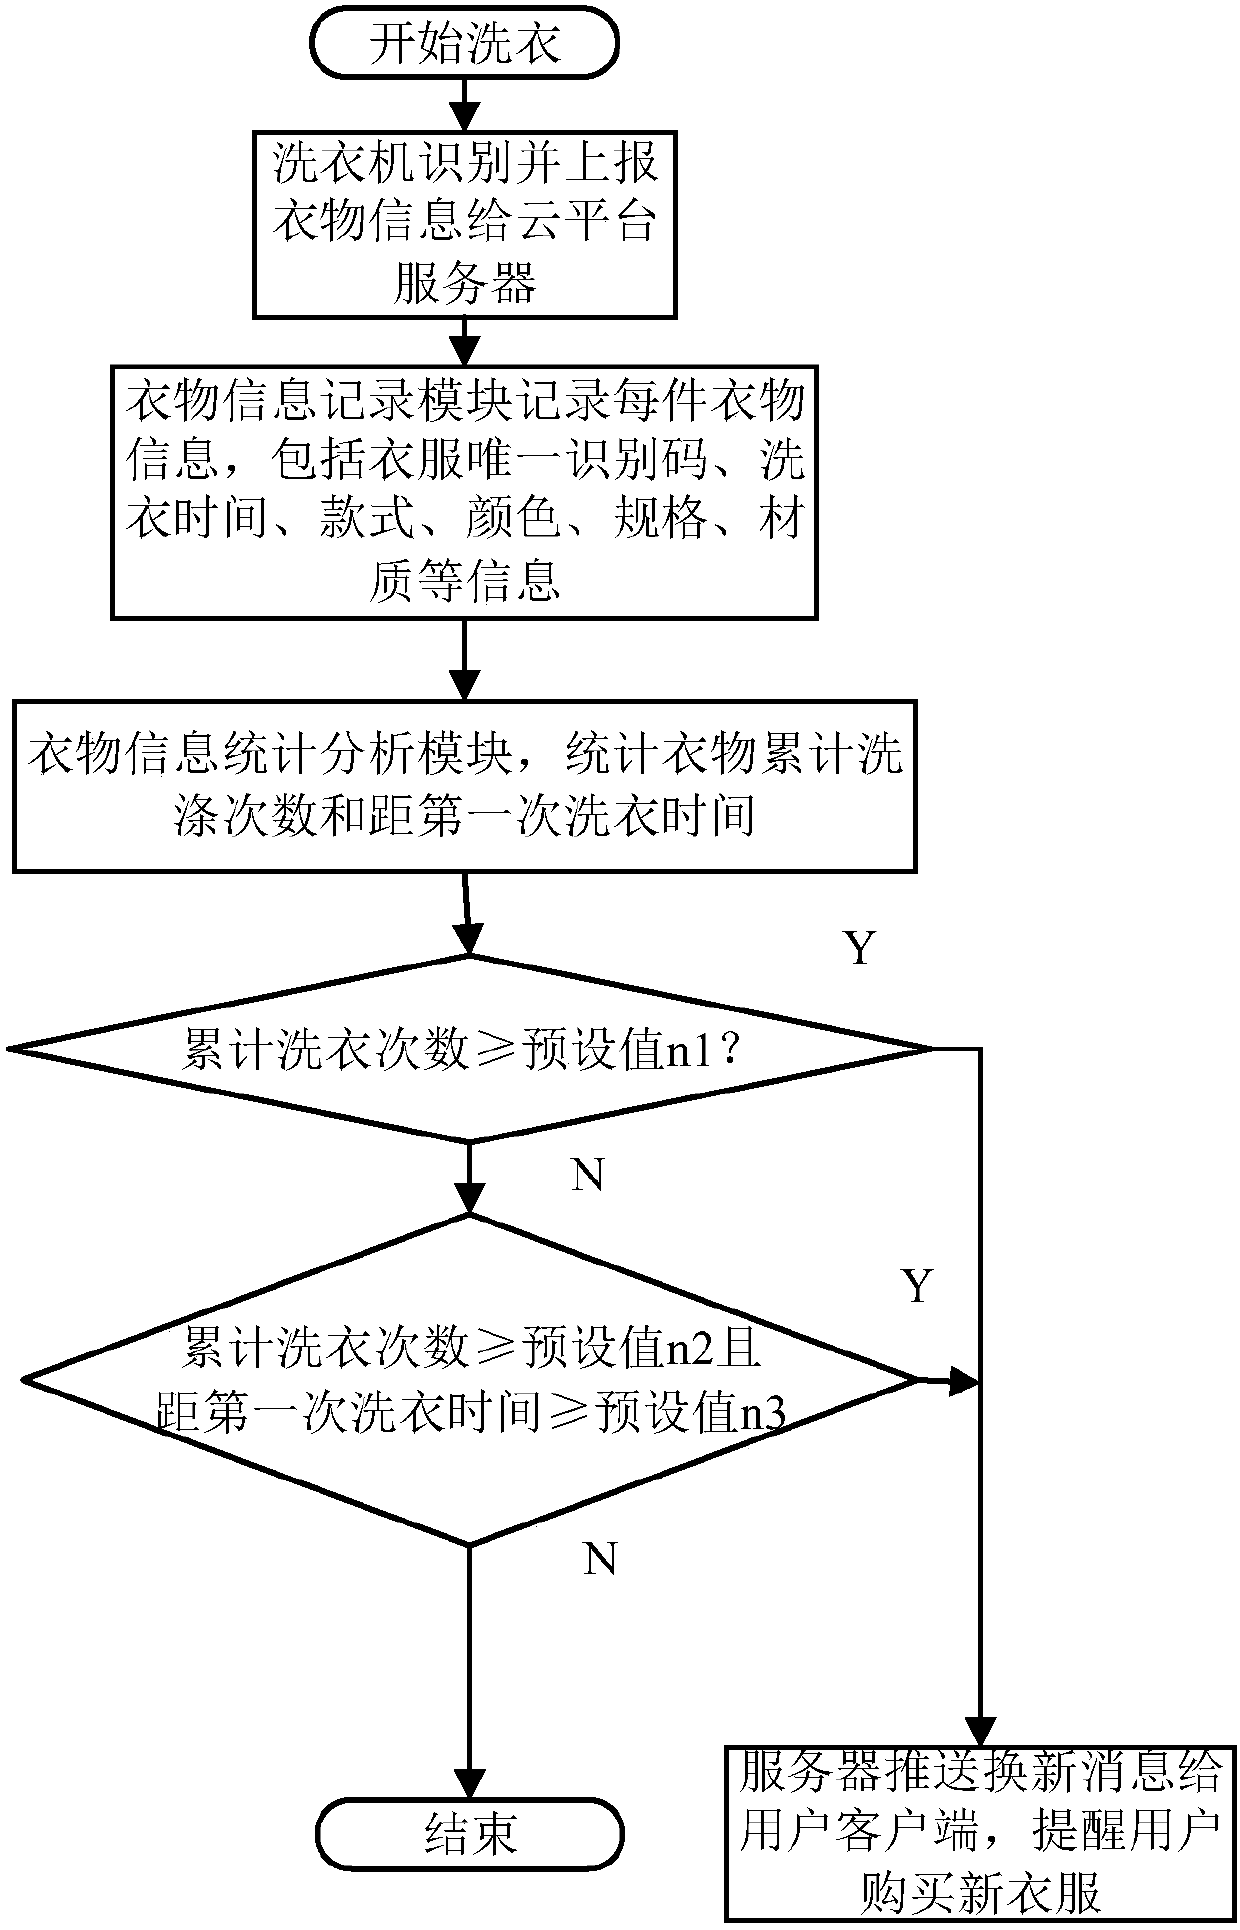 A clothes data collection and analysis method and system